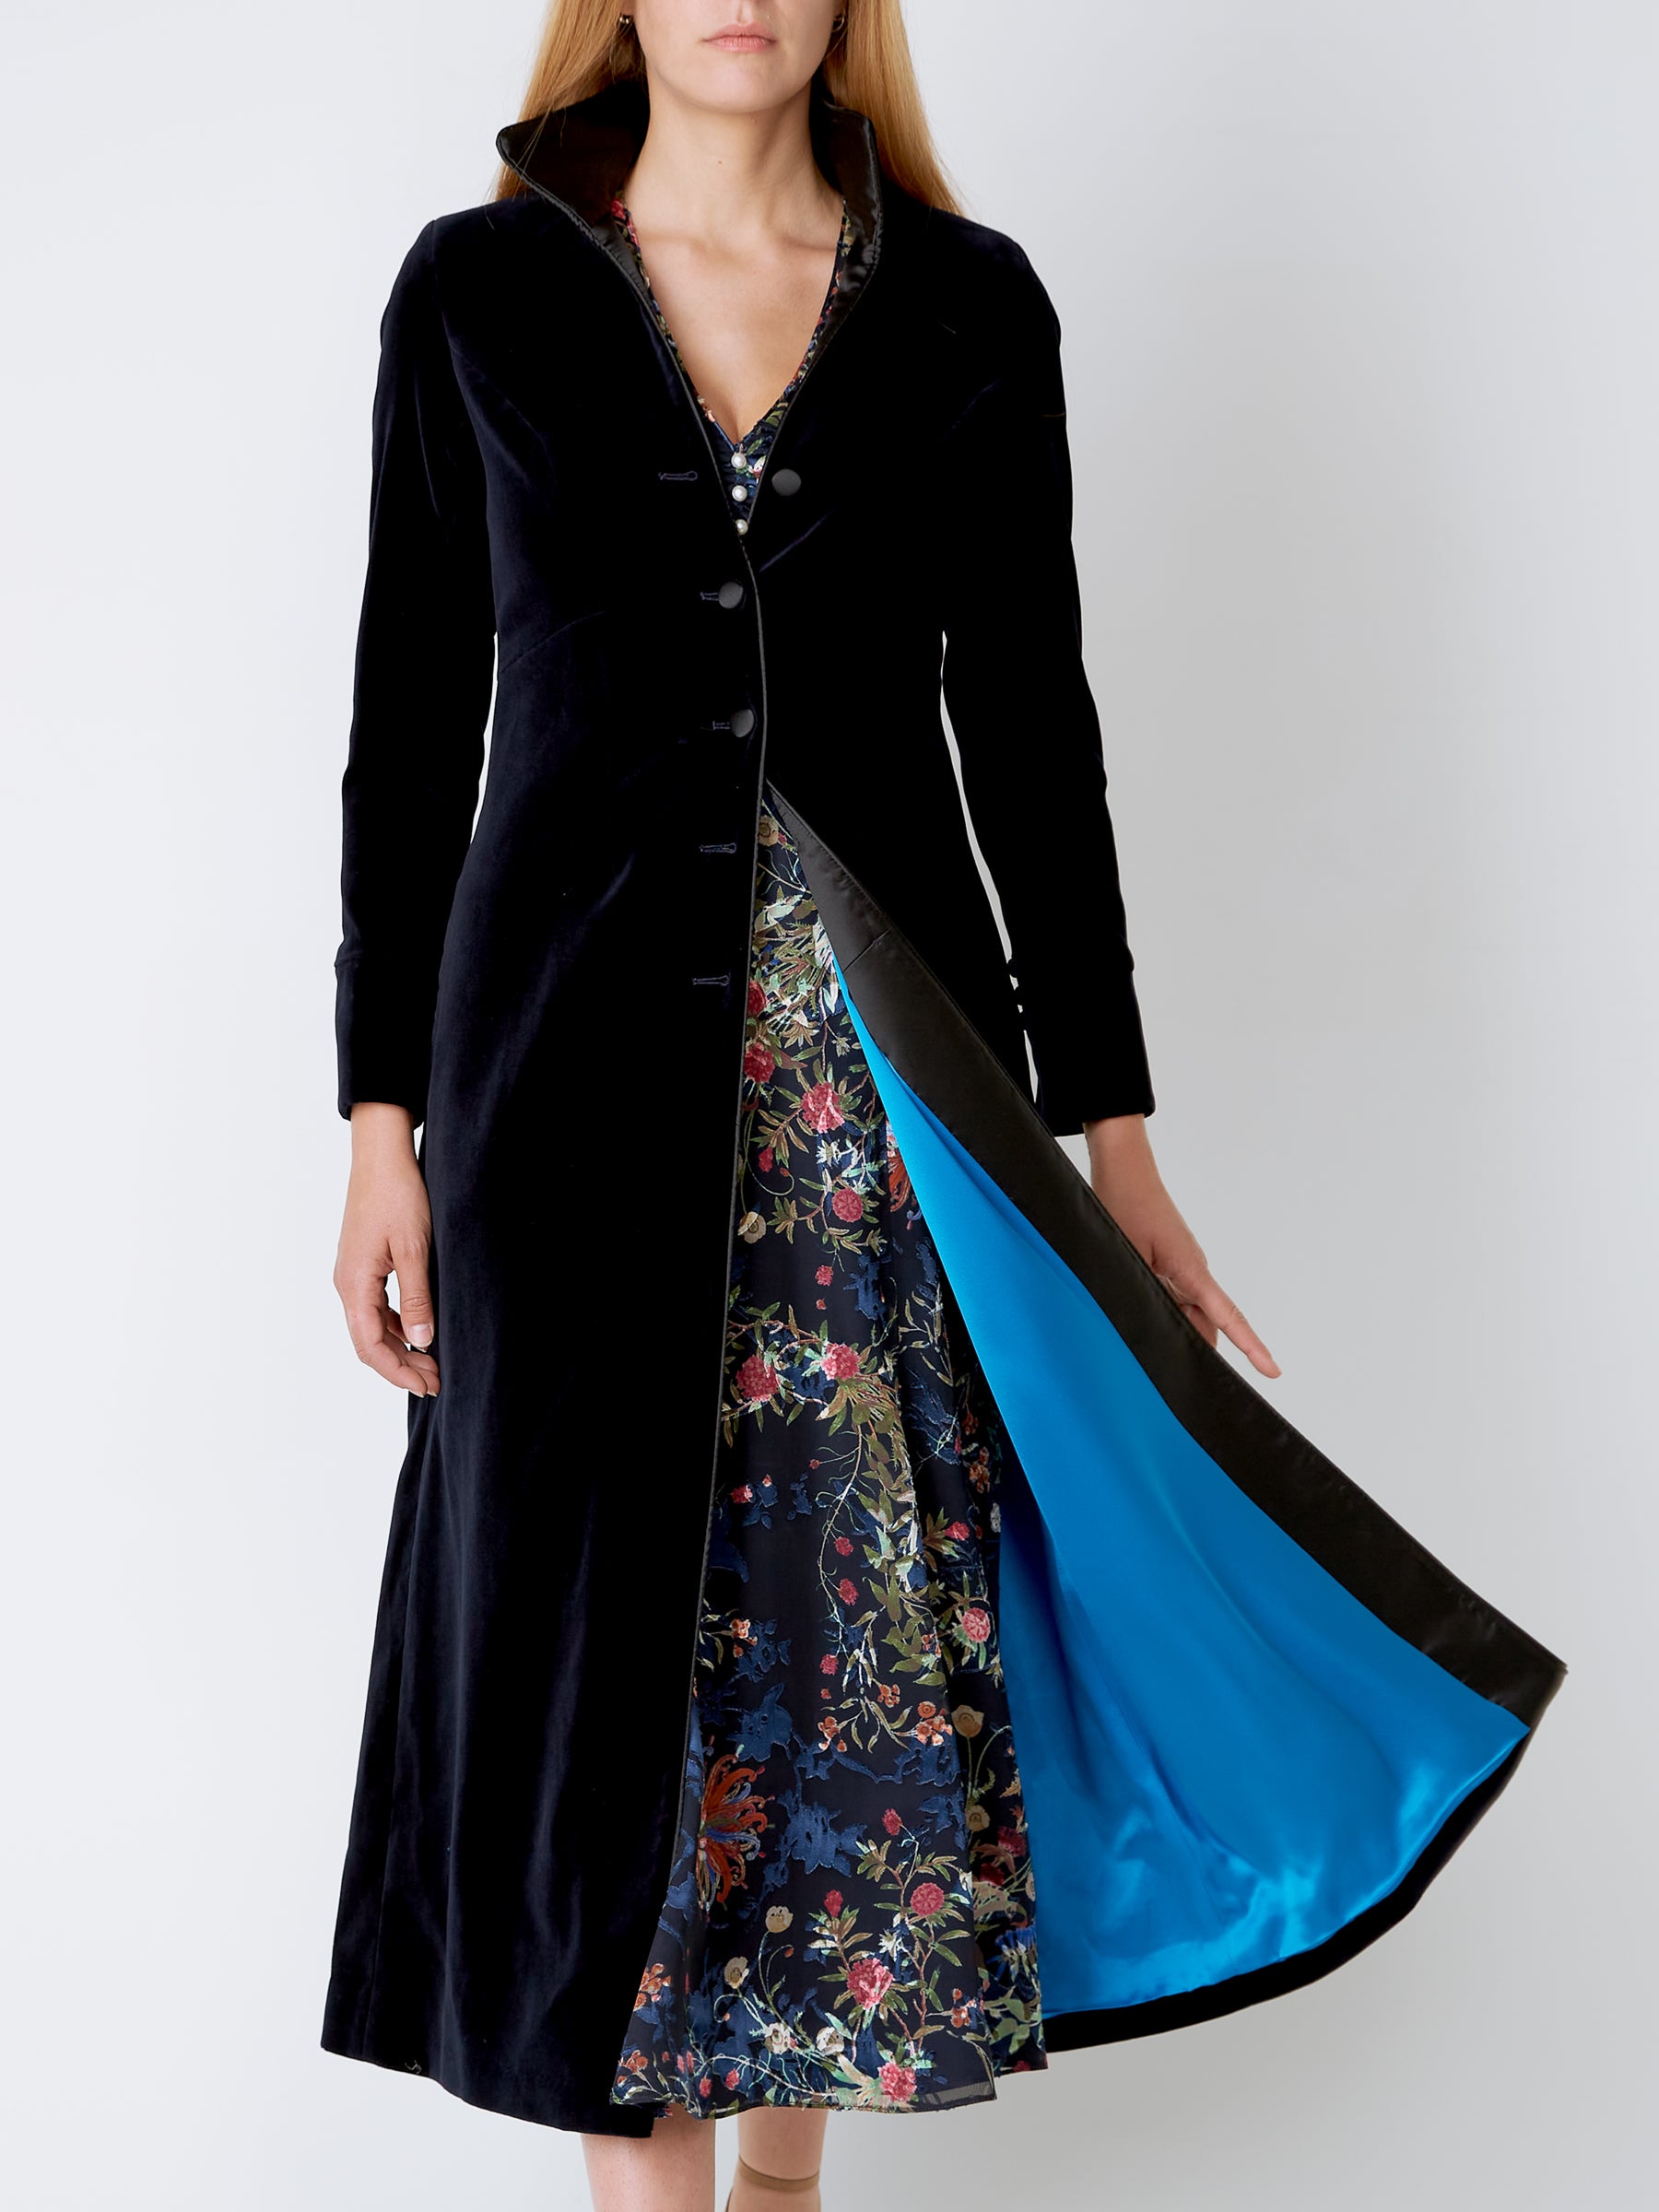 Soft Velvet Plus Size Swing Coat made to order with free shipping